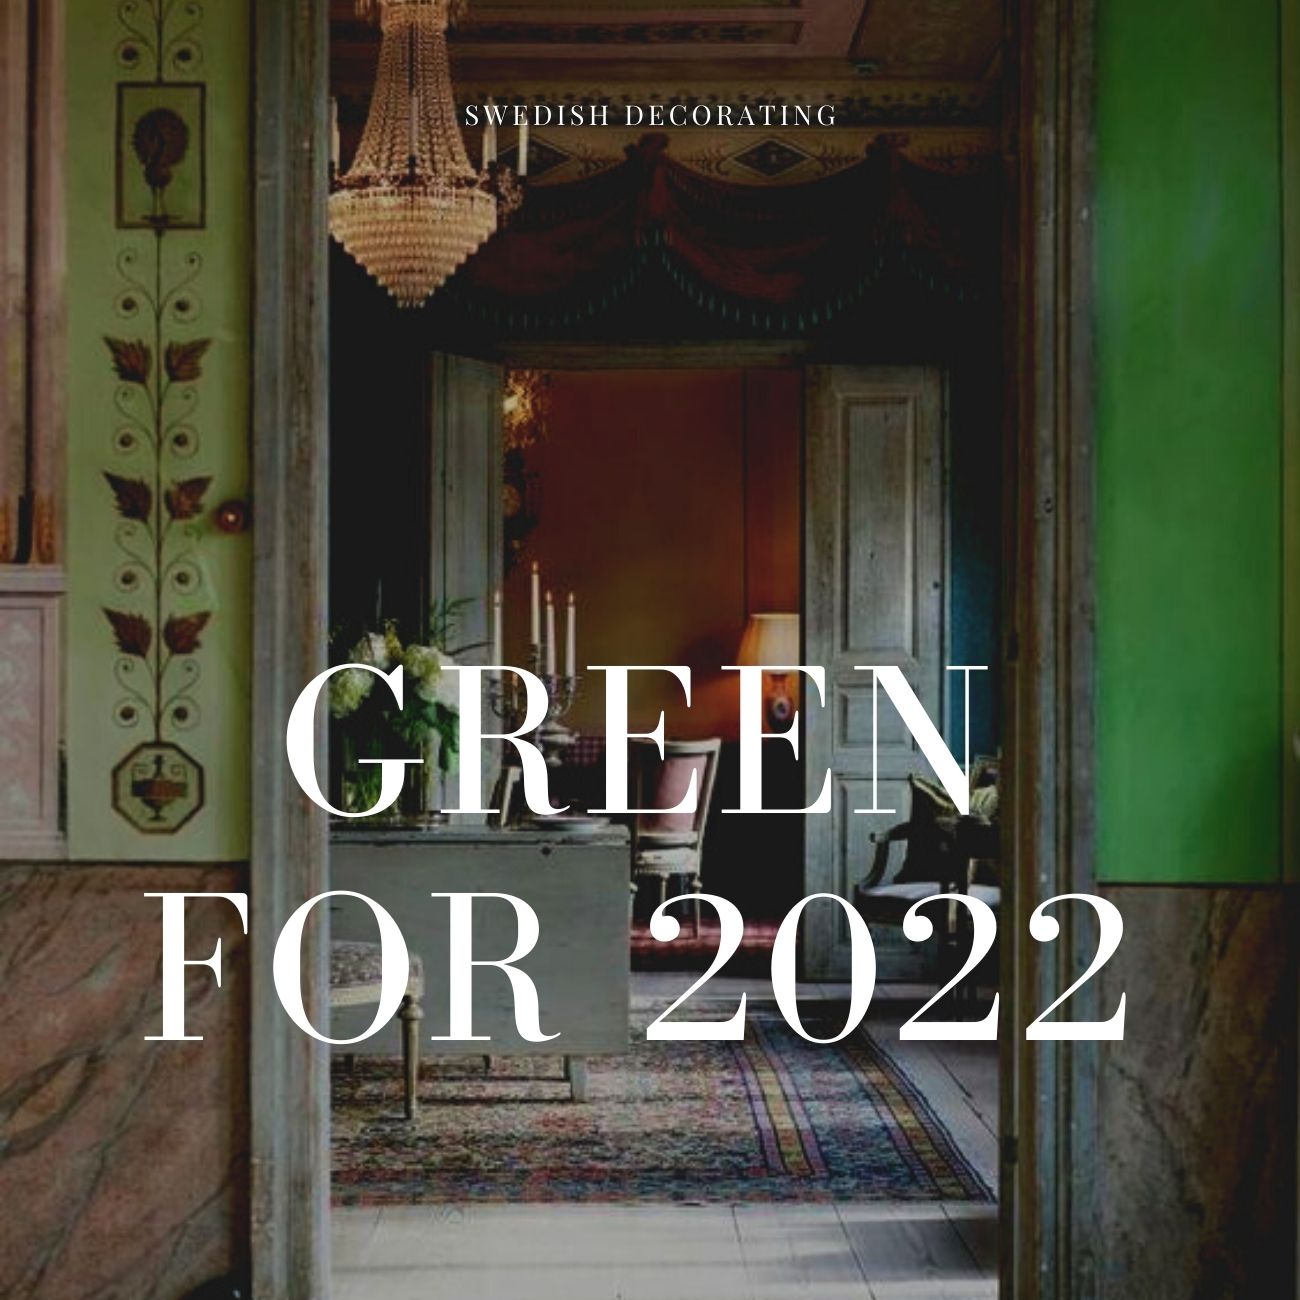 400 Professional Designers Picked Green As The ” Color For 2022 ” In A Recent Survey